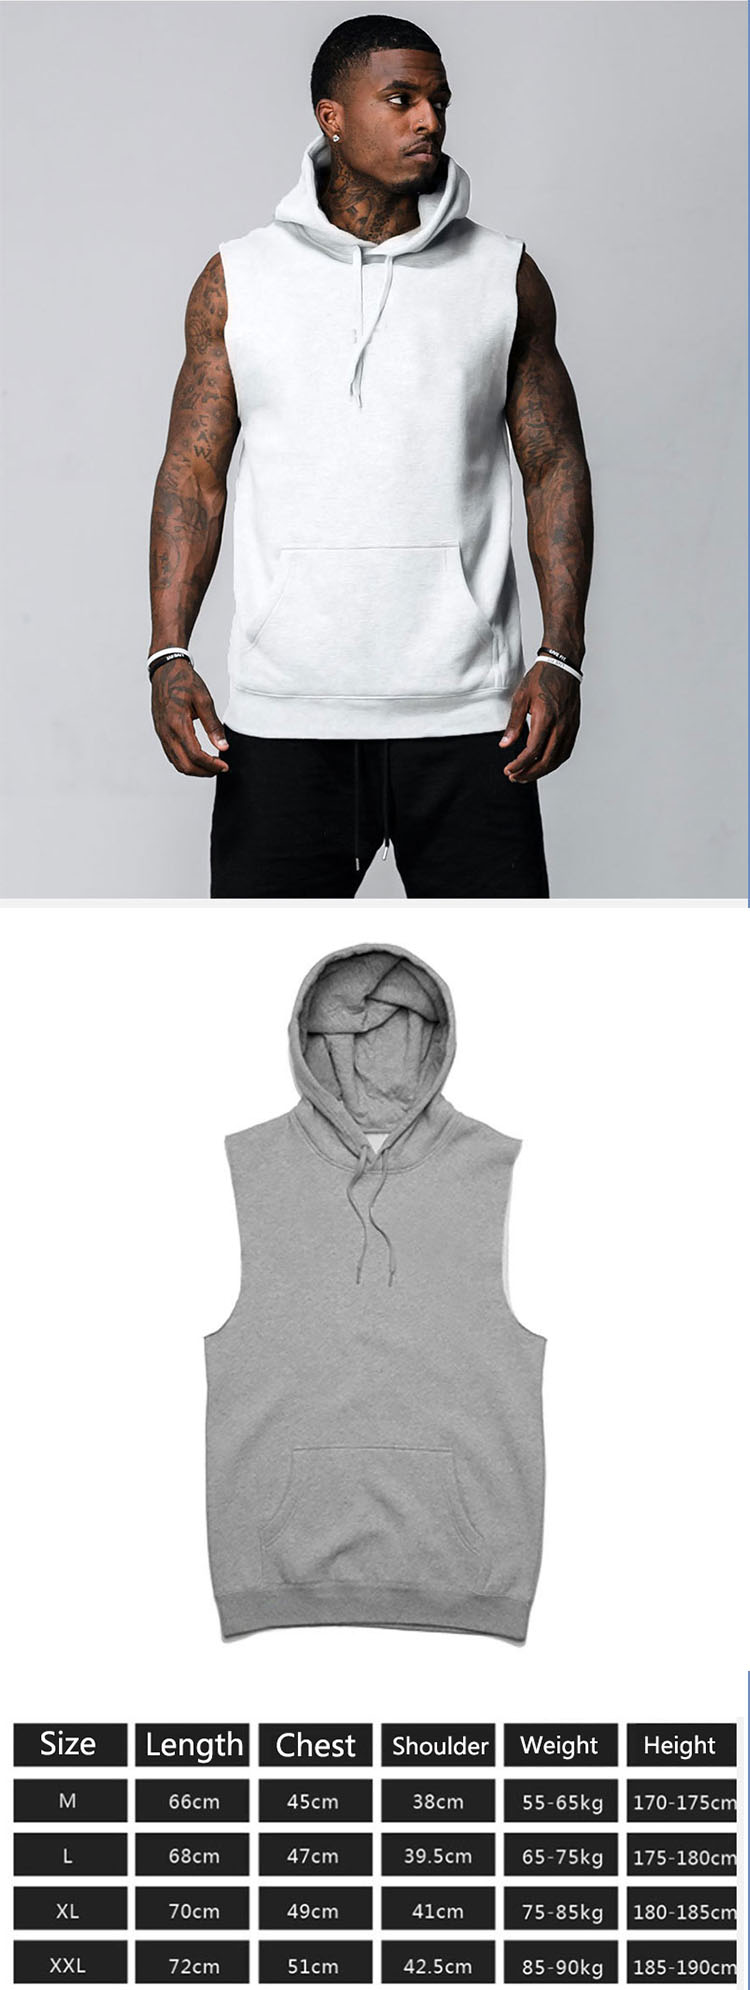 Hooded design to maintain body temperature and wear sports style.